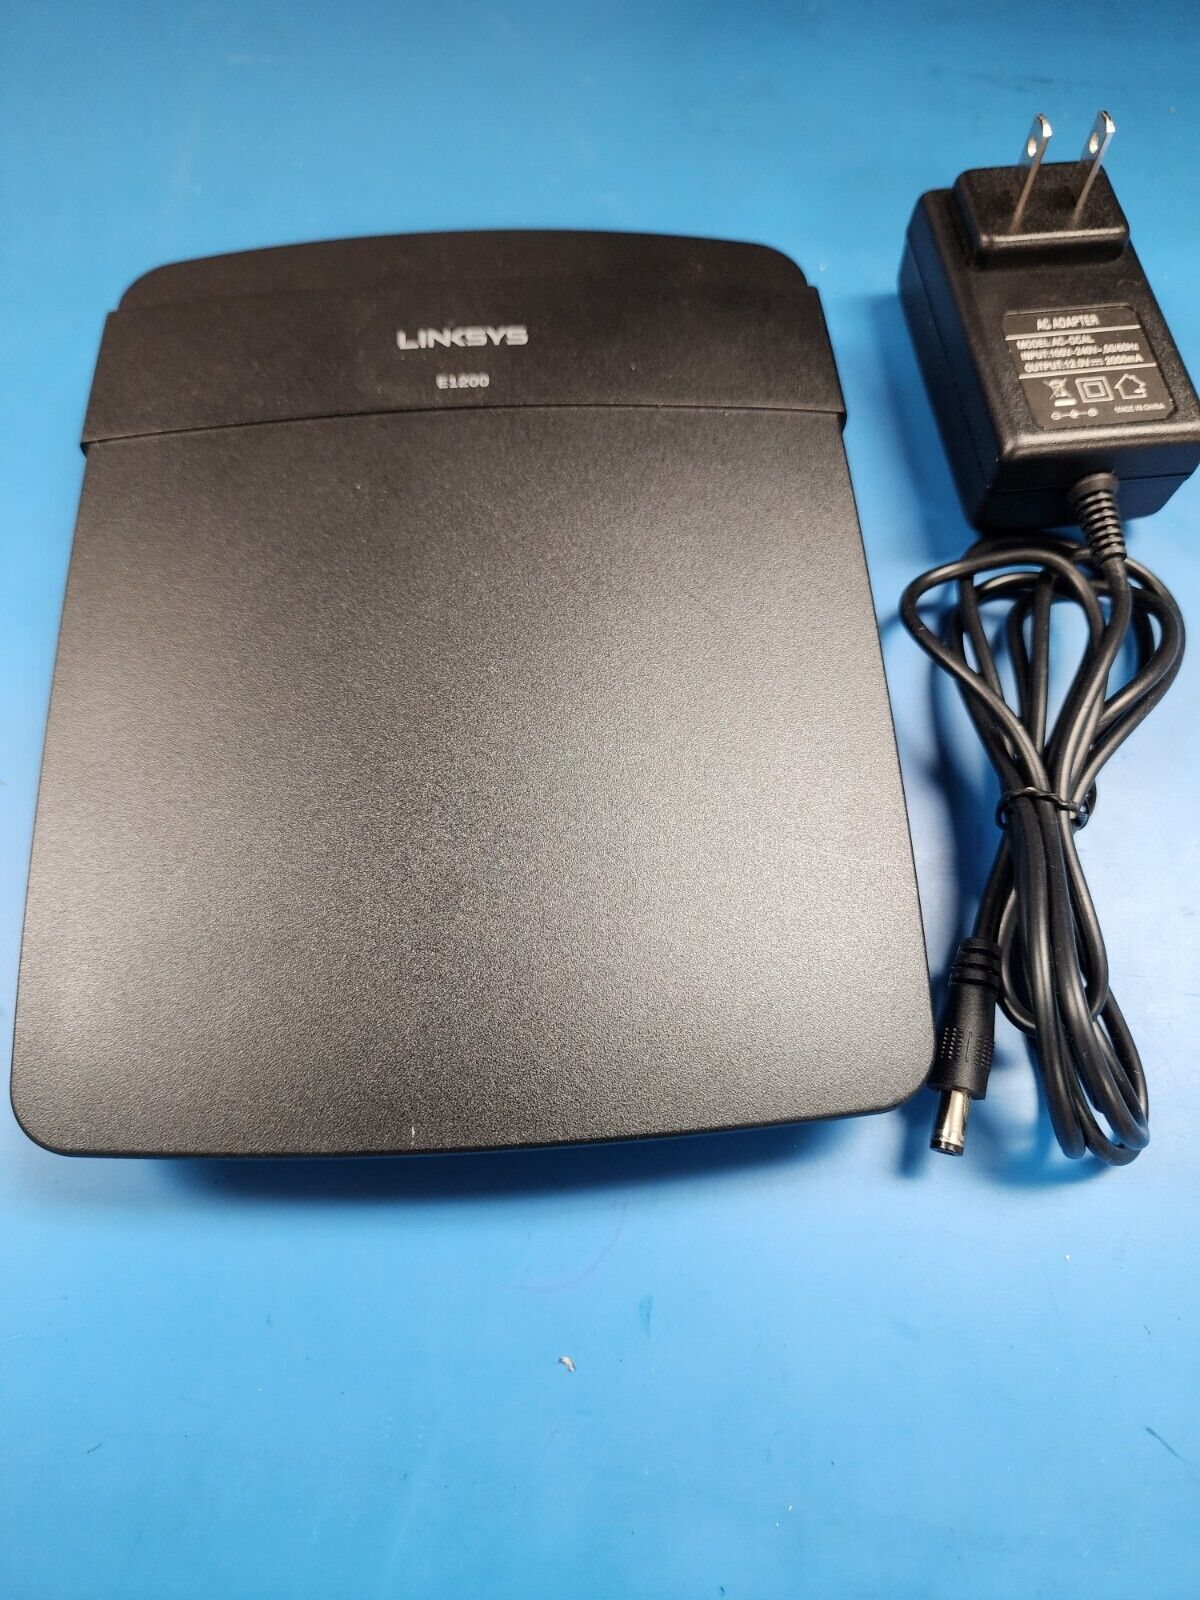 Cisco Linksys E1200 v2 Wireless N 300 Mbps 4-Port 10/100 Wifi Router With AC